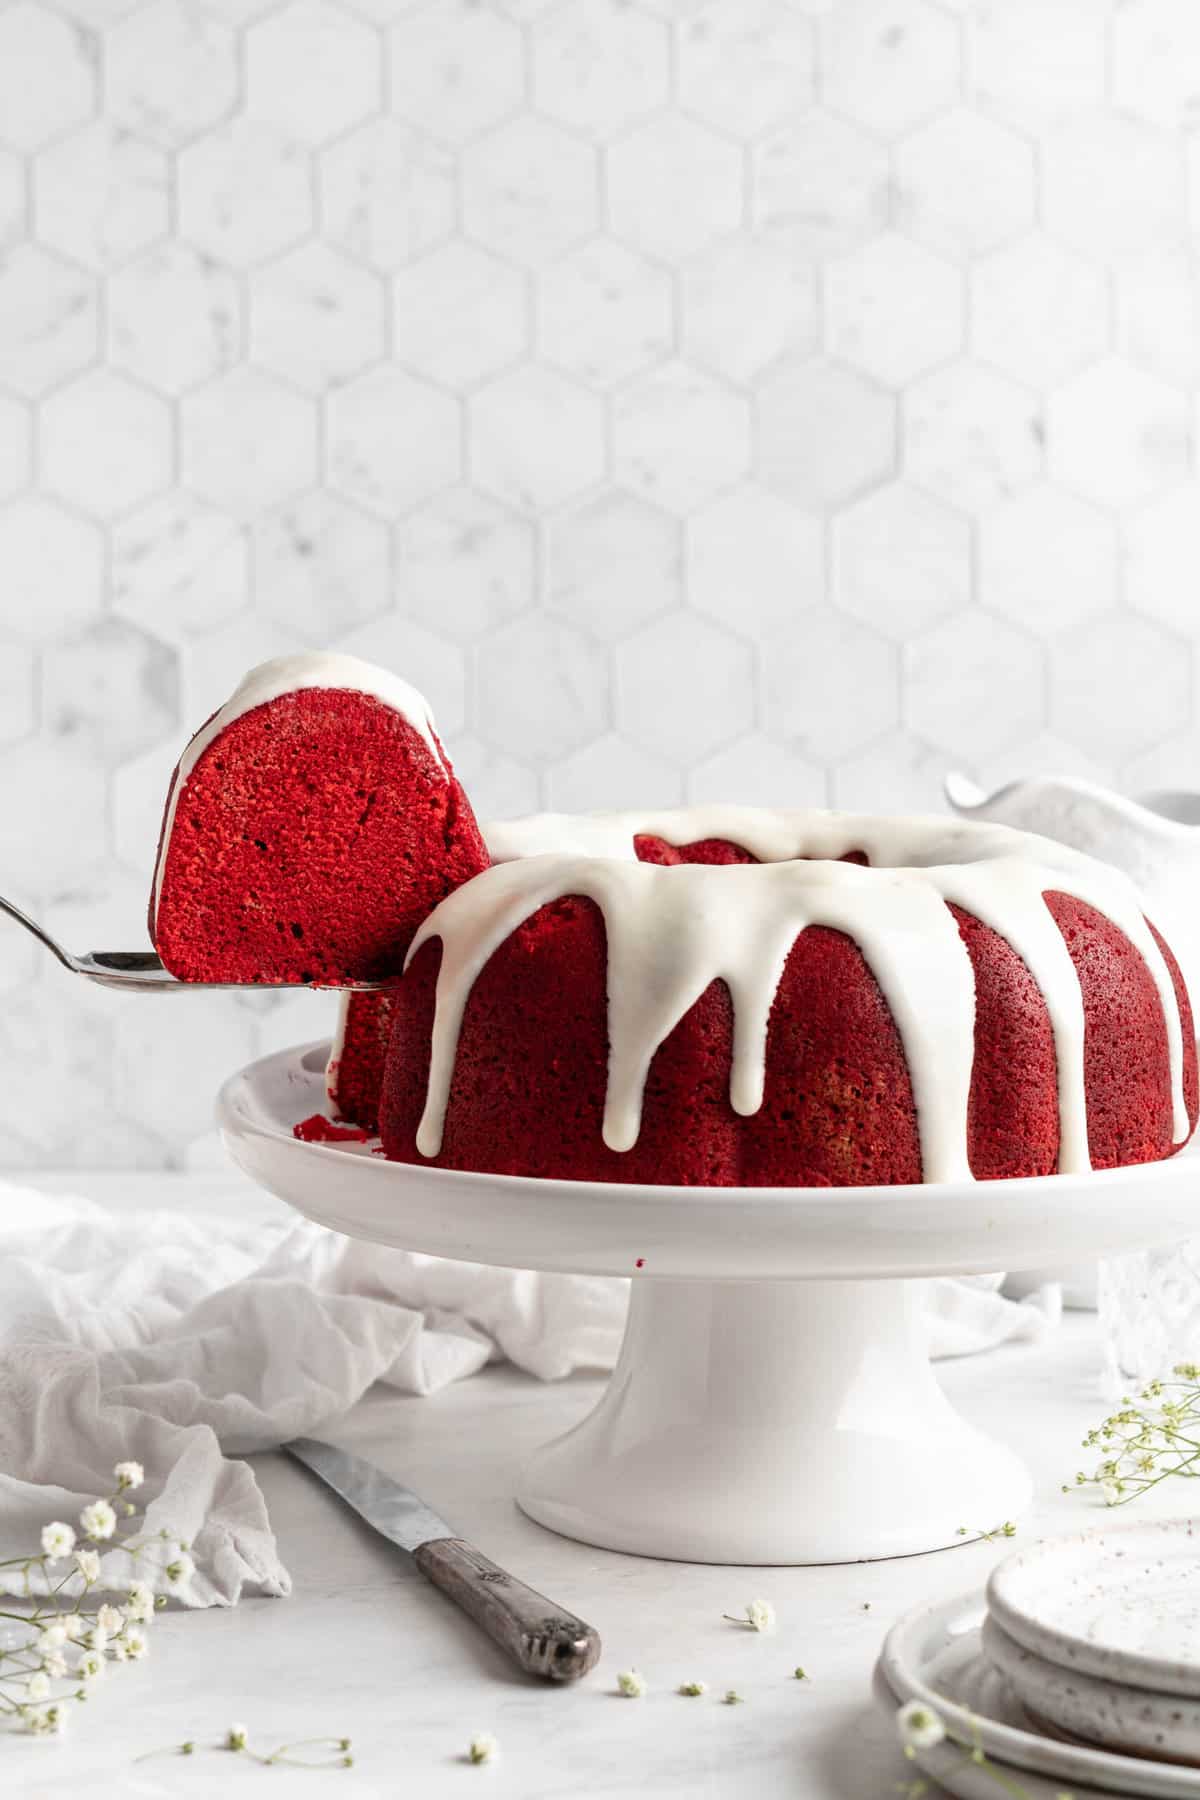 Red velvet bundt cake on a cake pedestal with a slice taken out and held up by a spatula.